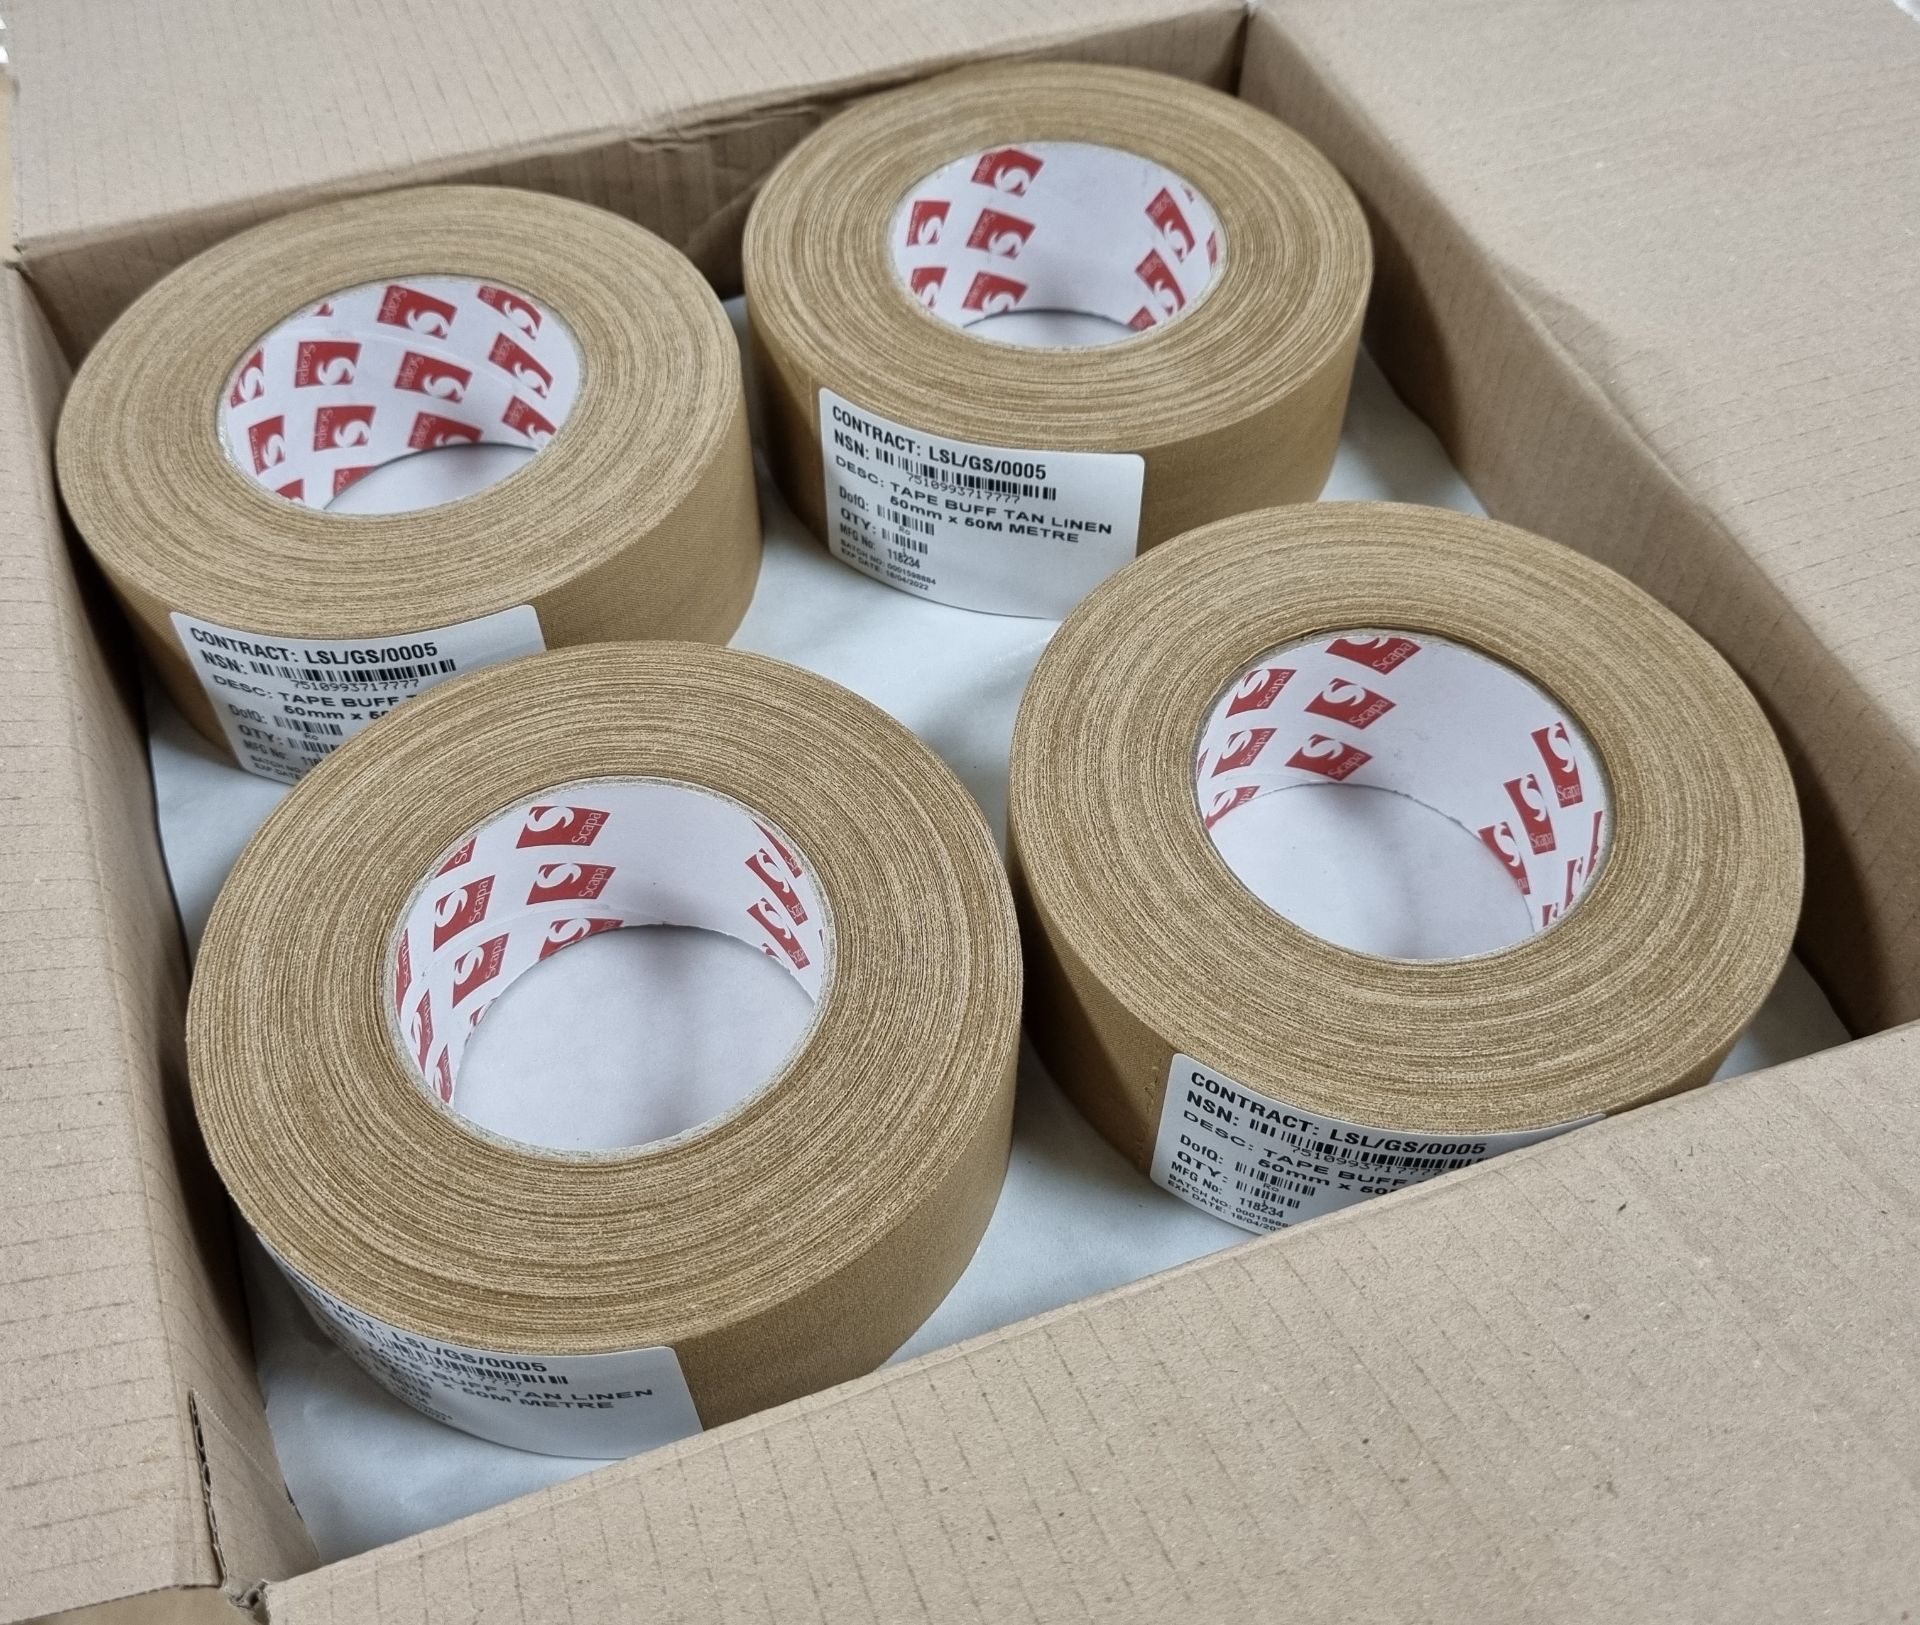 33x boxes of Scapa 3302 Beige adhesive cloth tape - 50mm x 50M length - 16 rolls per box - Image 3 of 4